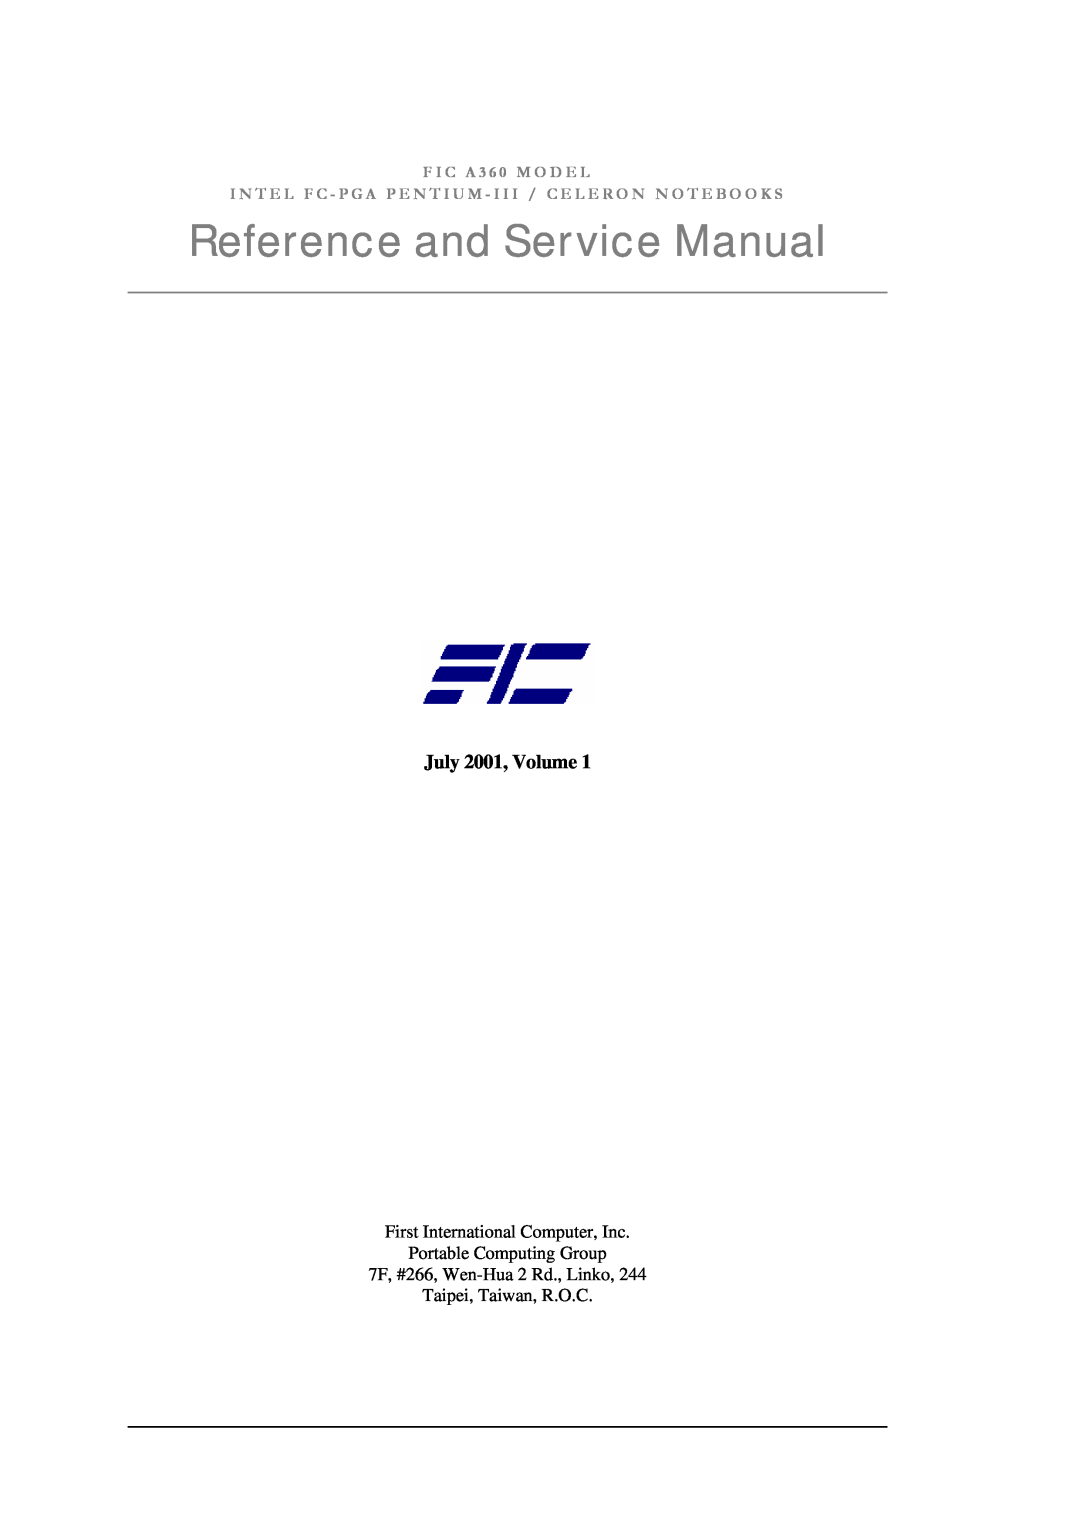 FIC A360 service manual Reference and Service Manual, July 2001, Volume, F I C A 3 6 0 M O D E L 